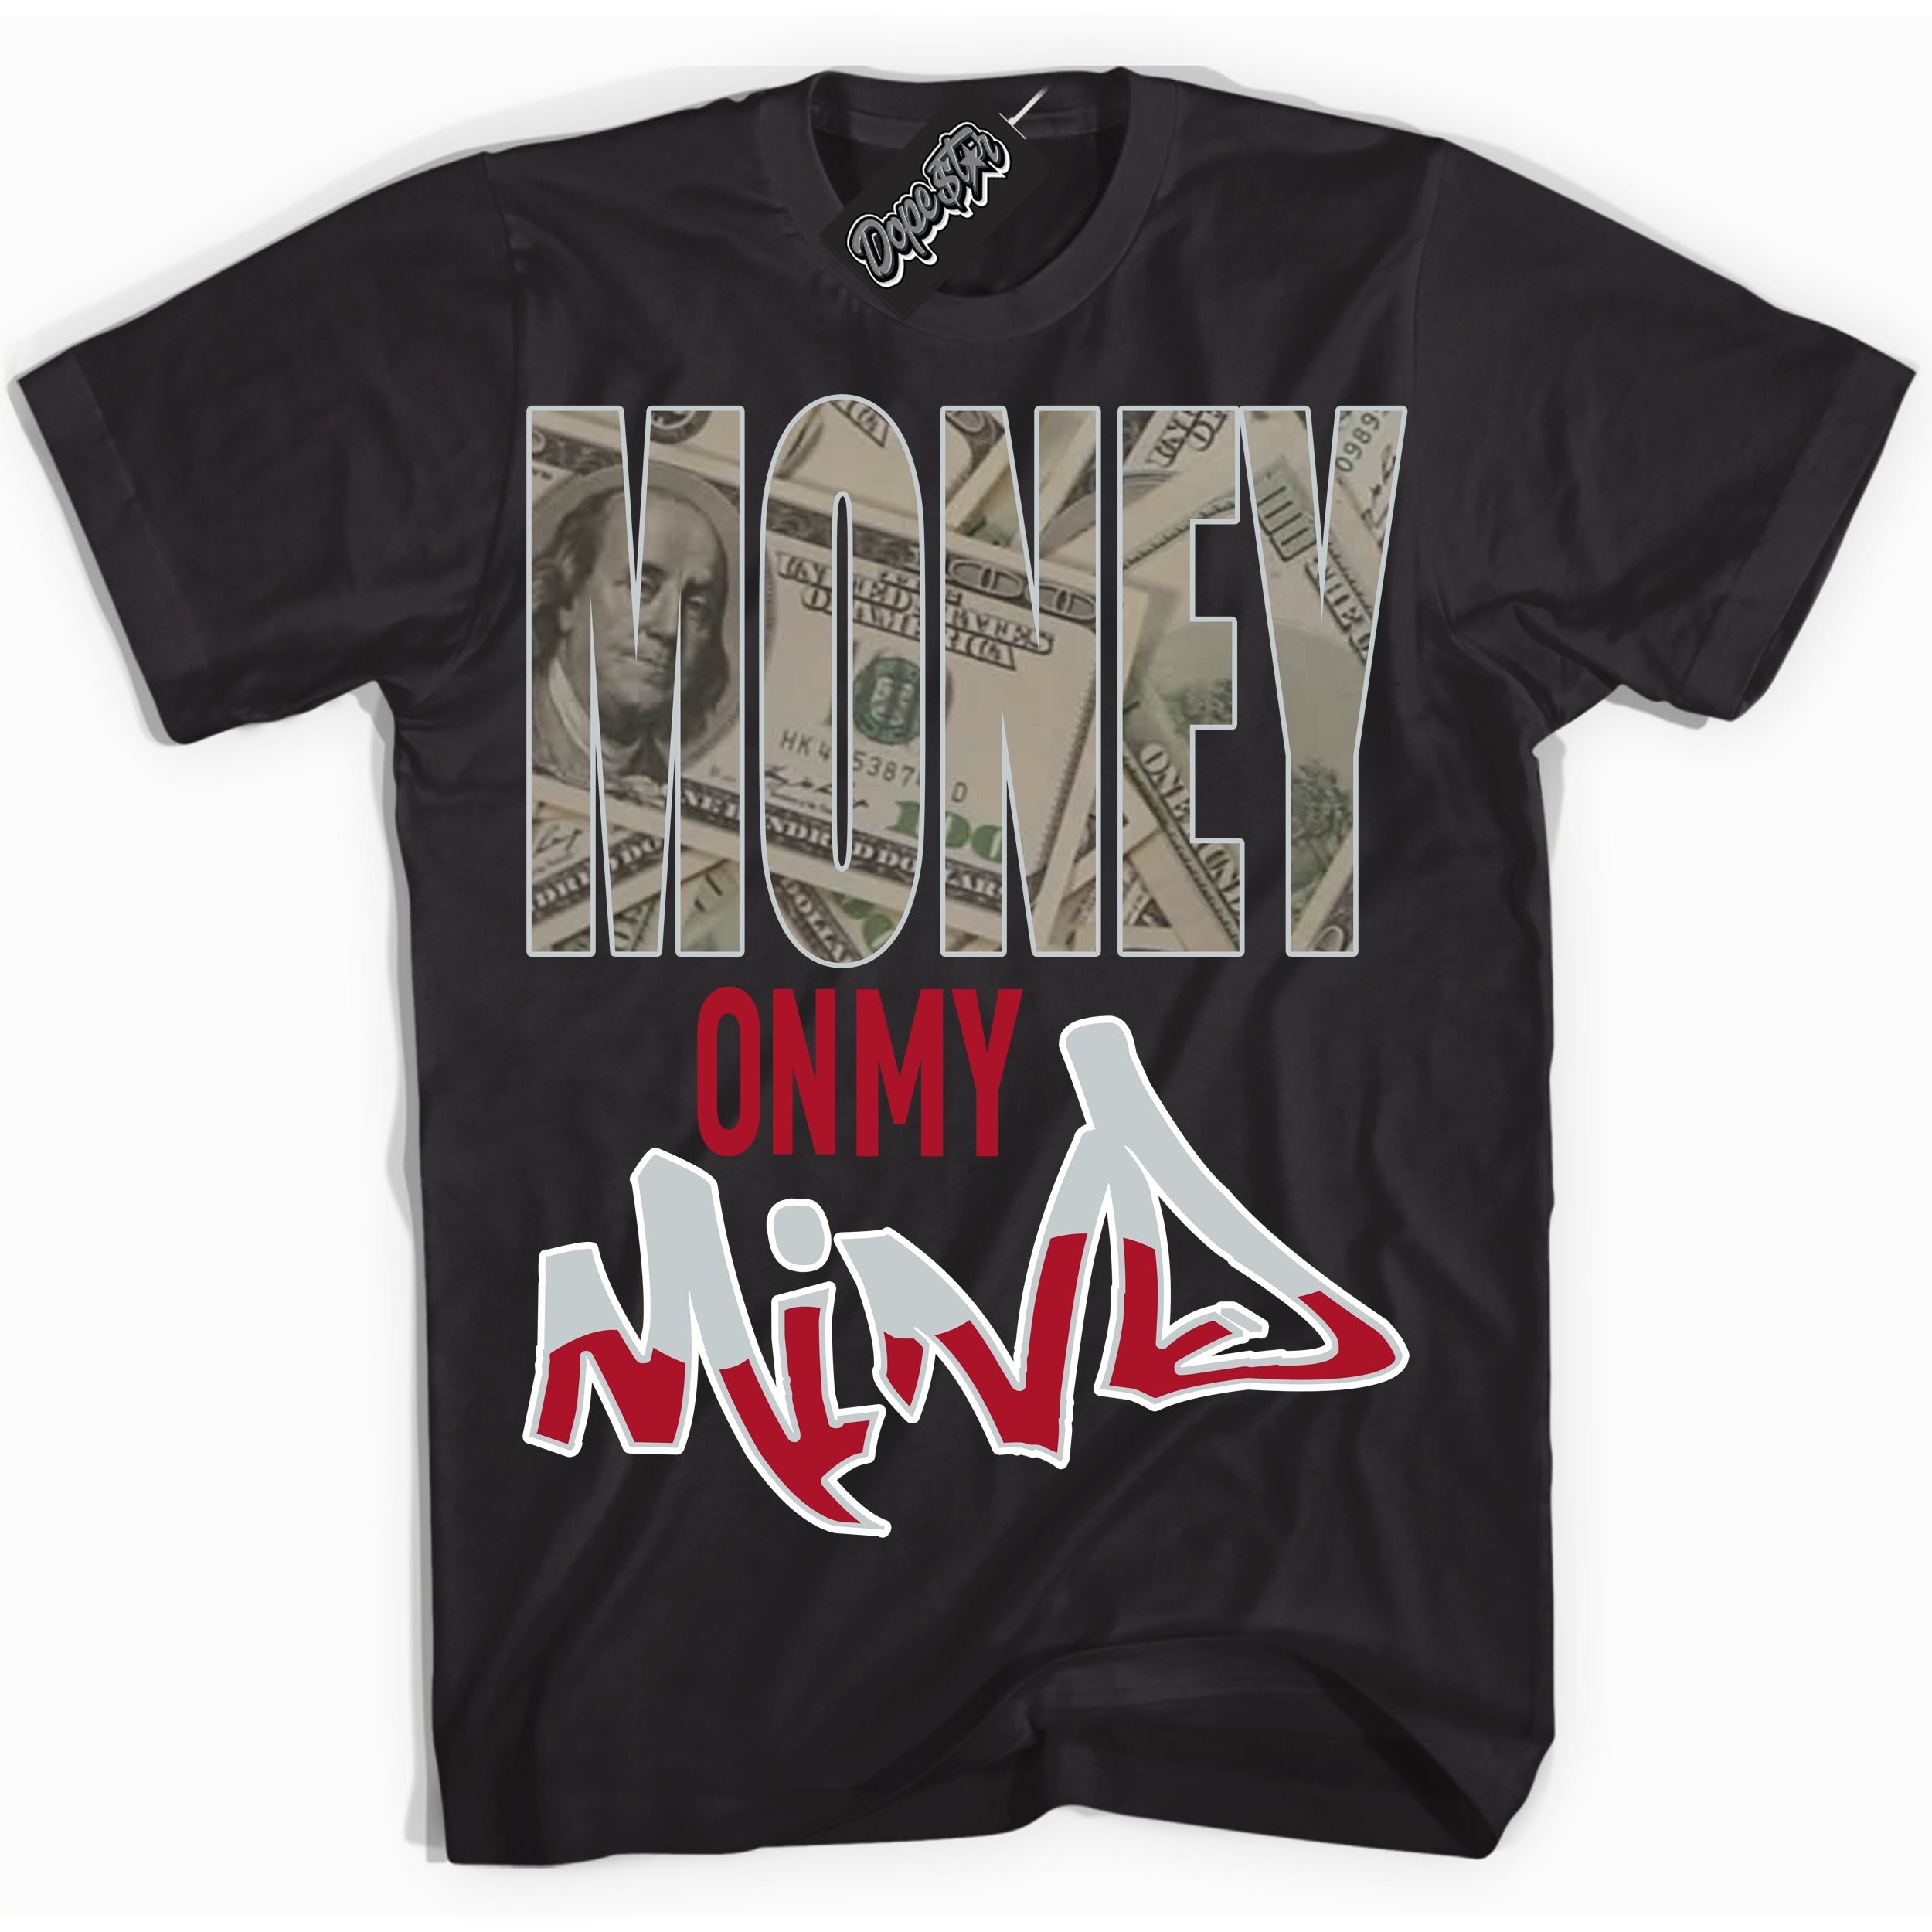 Cool Black Shirt with “ Money On My Mind” design that perfectly matches Reverse Ultraman Sneakers.